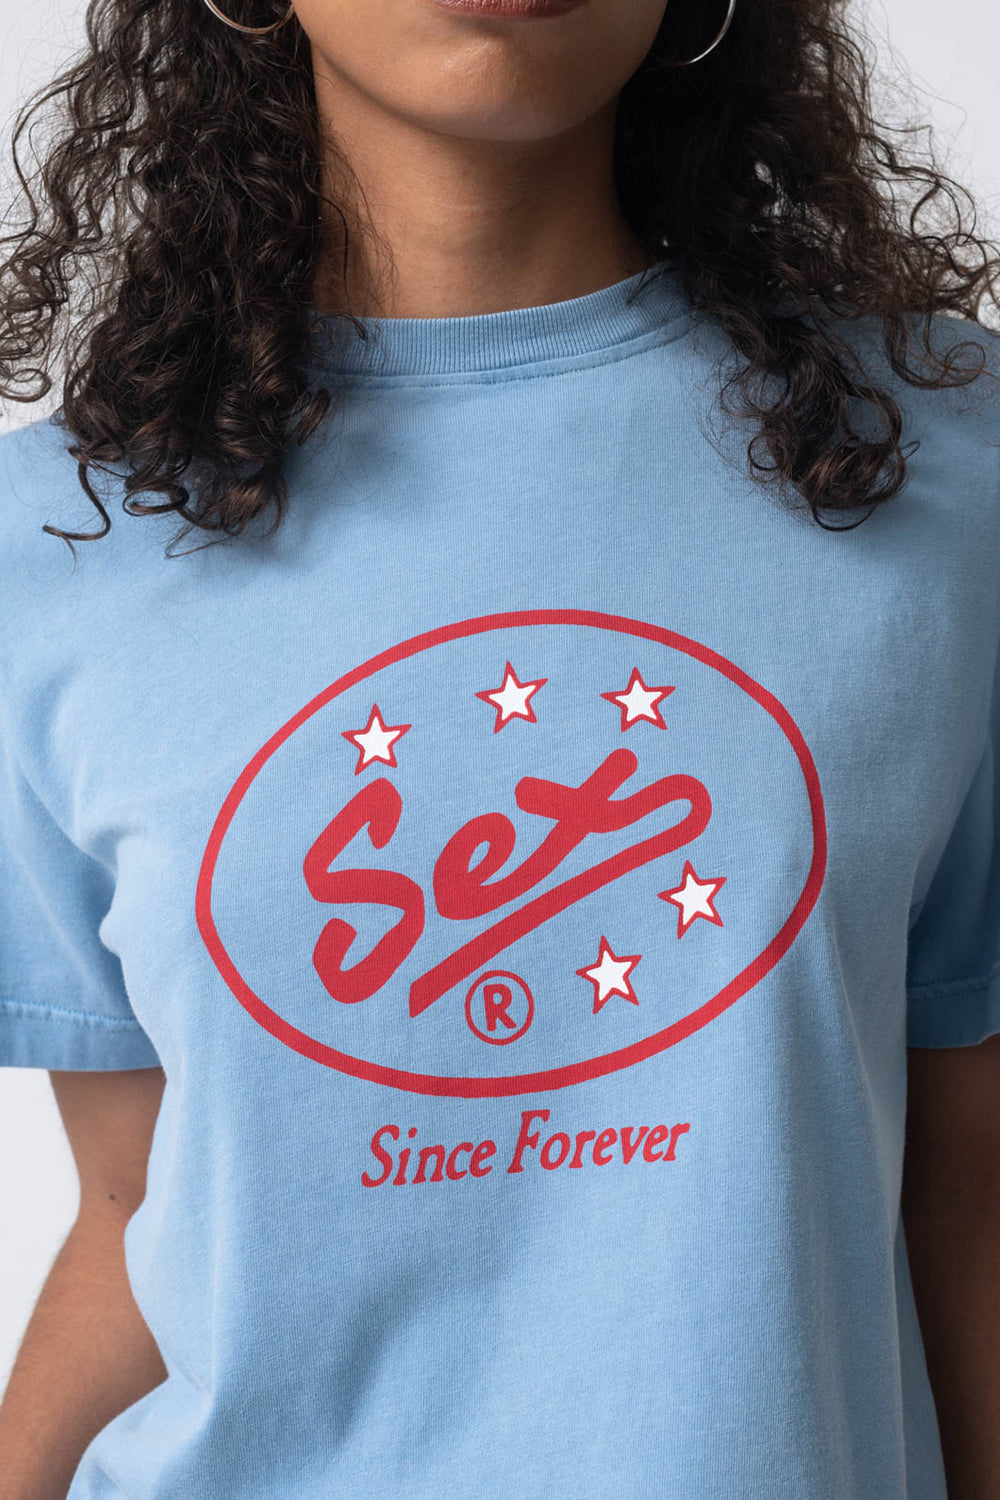 Since Forever T shirt